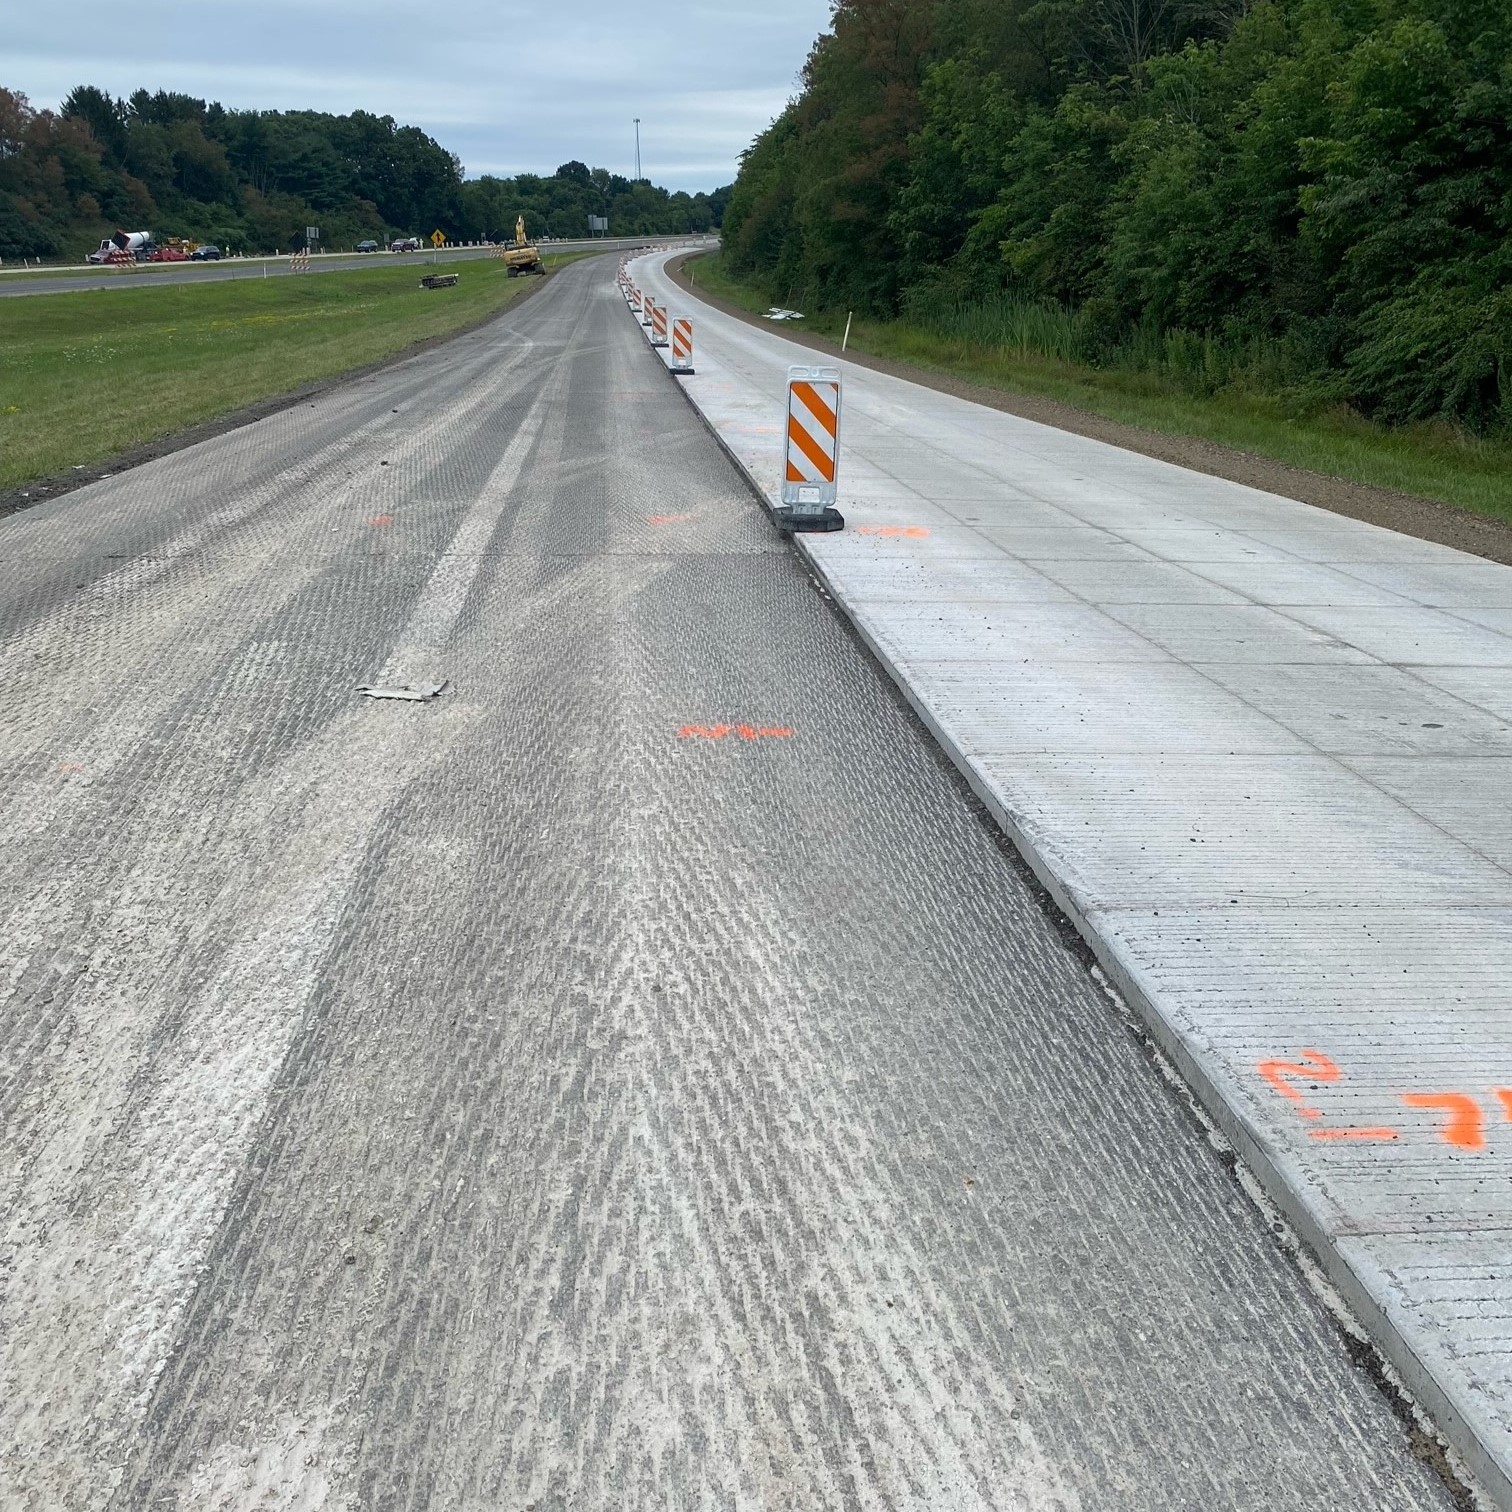 An image of a tree-lined, four-lane roadway with a grassy median between either side of the roadway with a line of orange and white work zone barricades between the completed lane and the lane be prepared for the concrete overlay